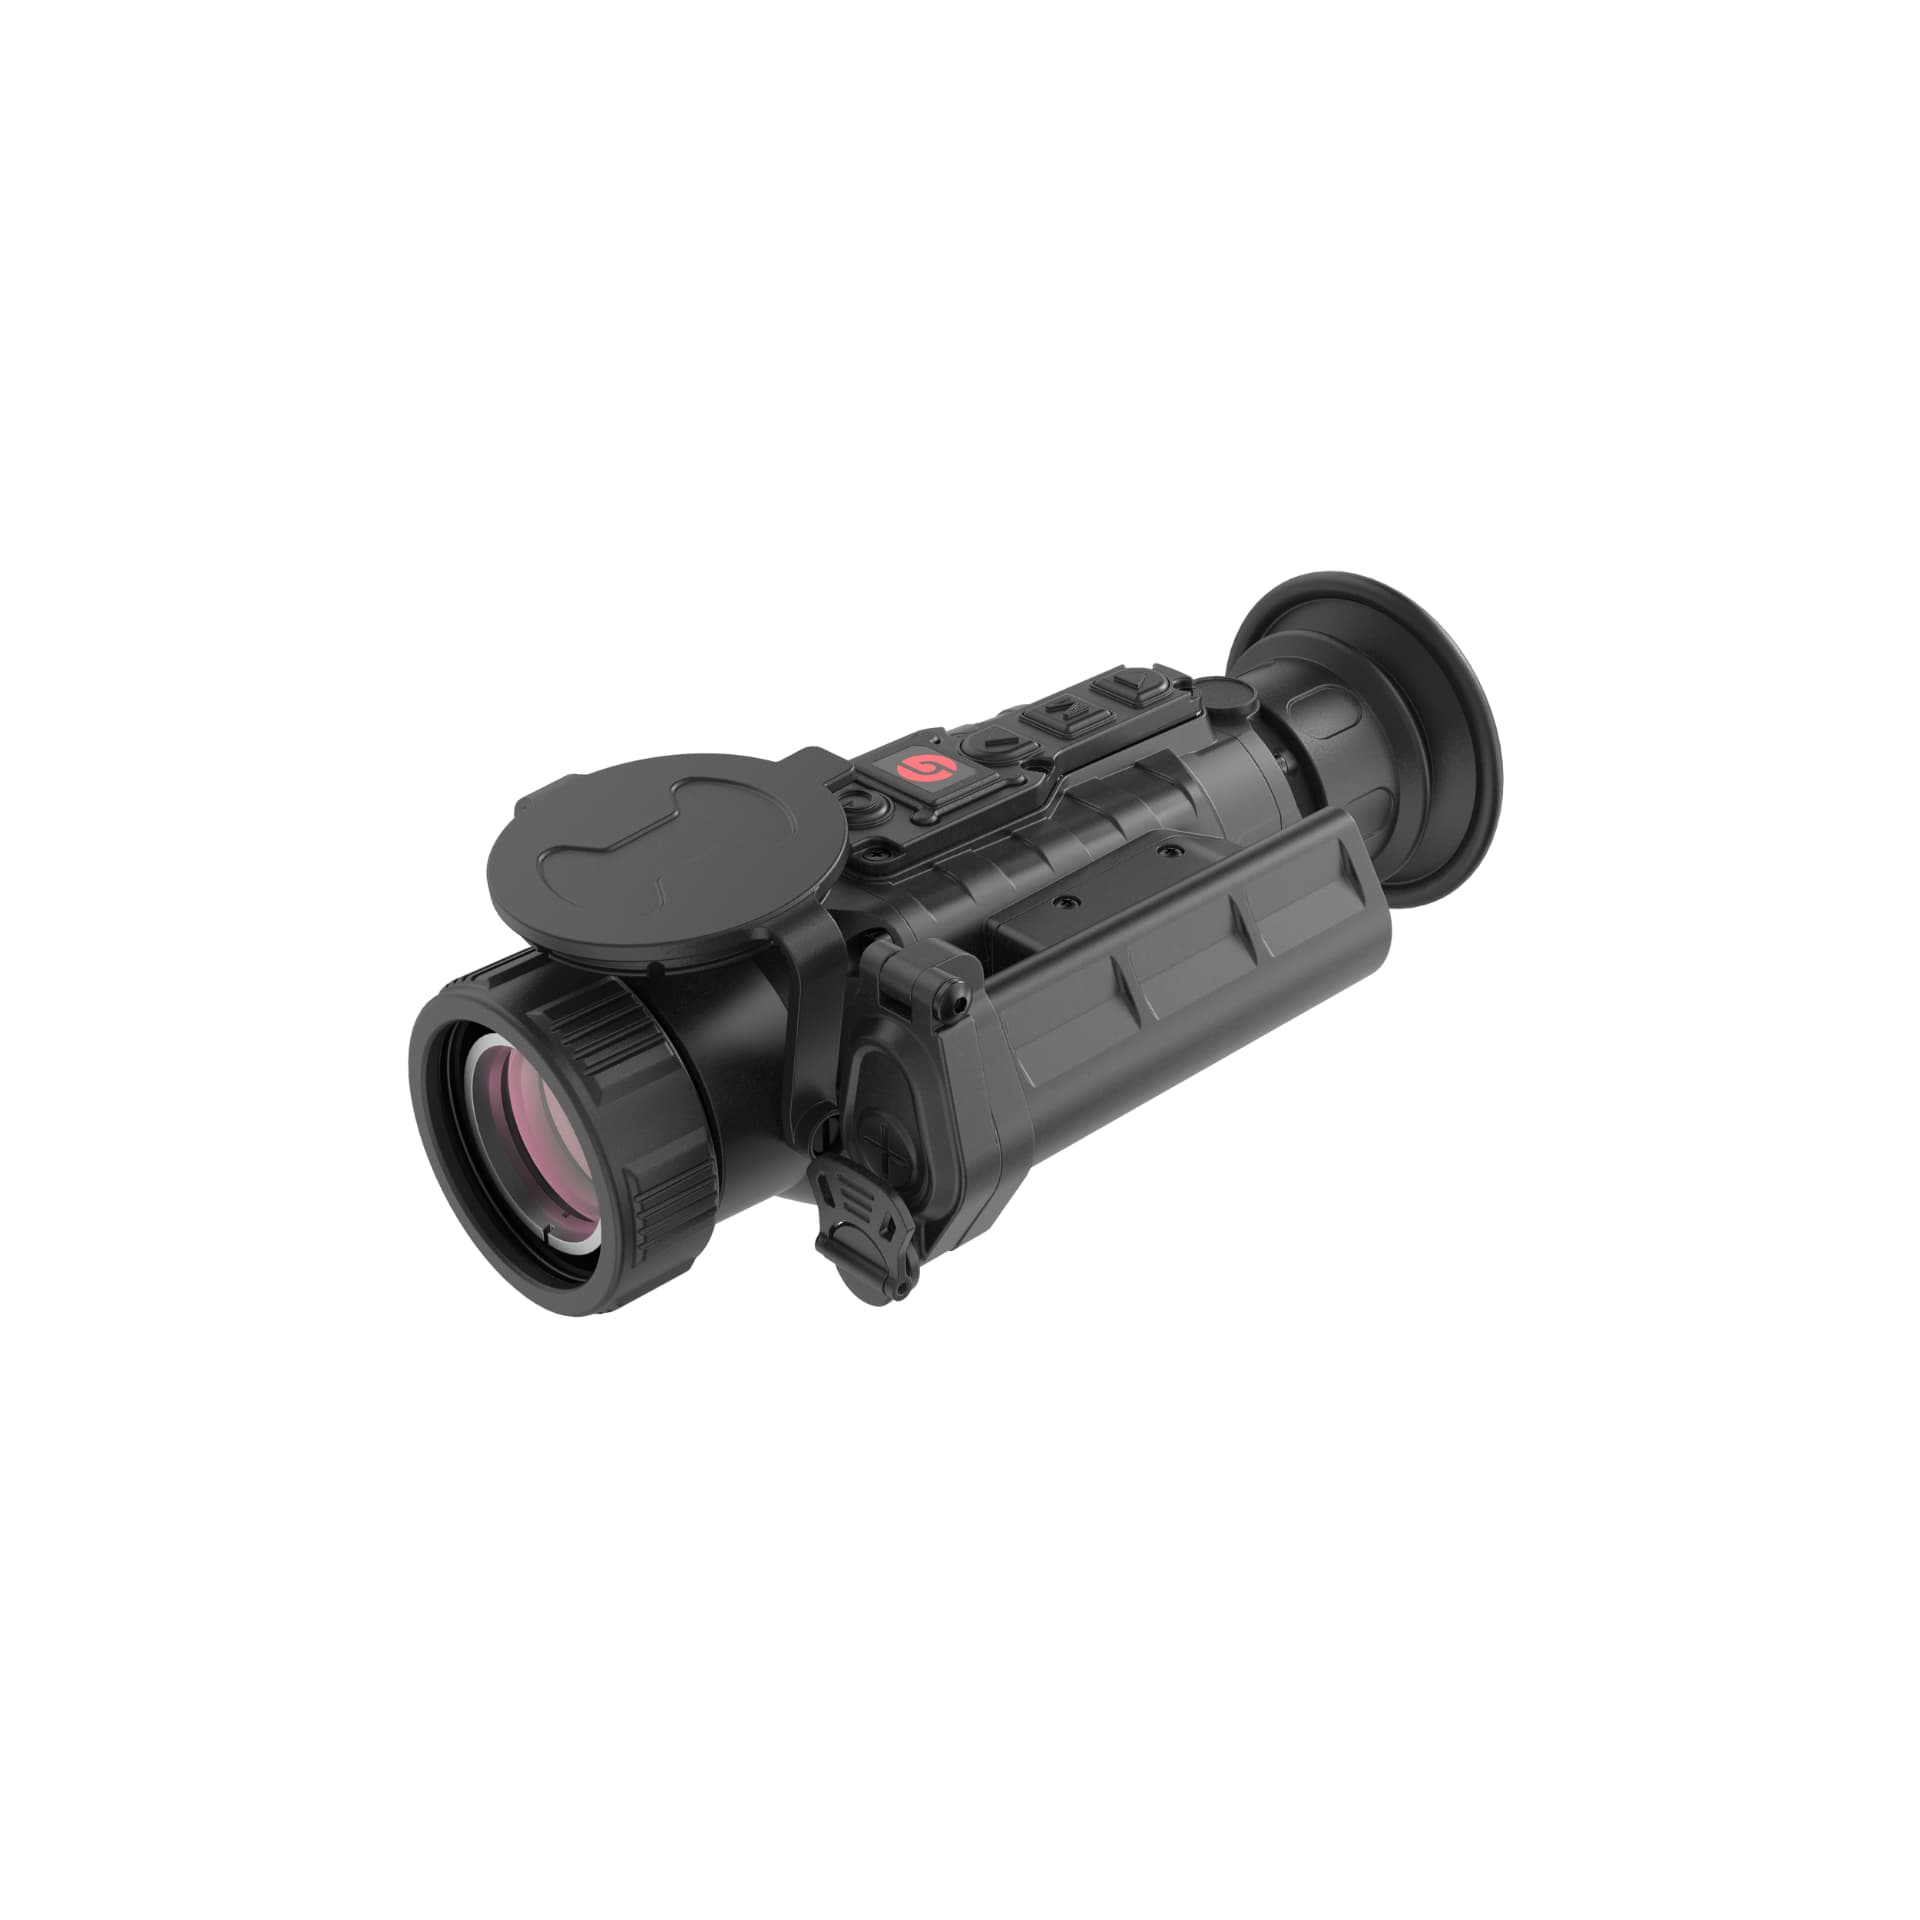 Guide TA450 Thermal Imaging Clip-On Attachment